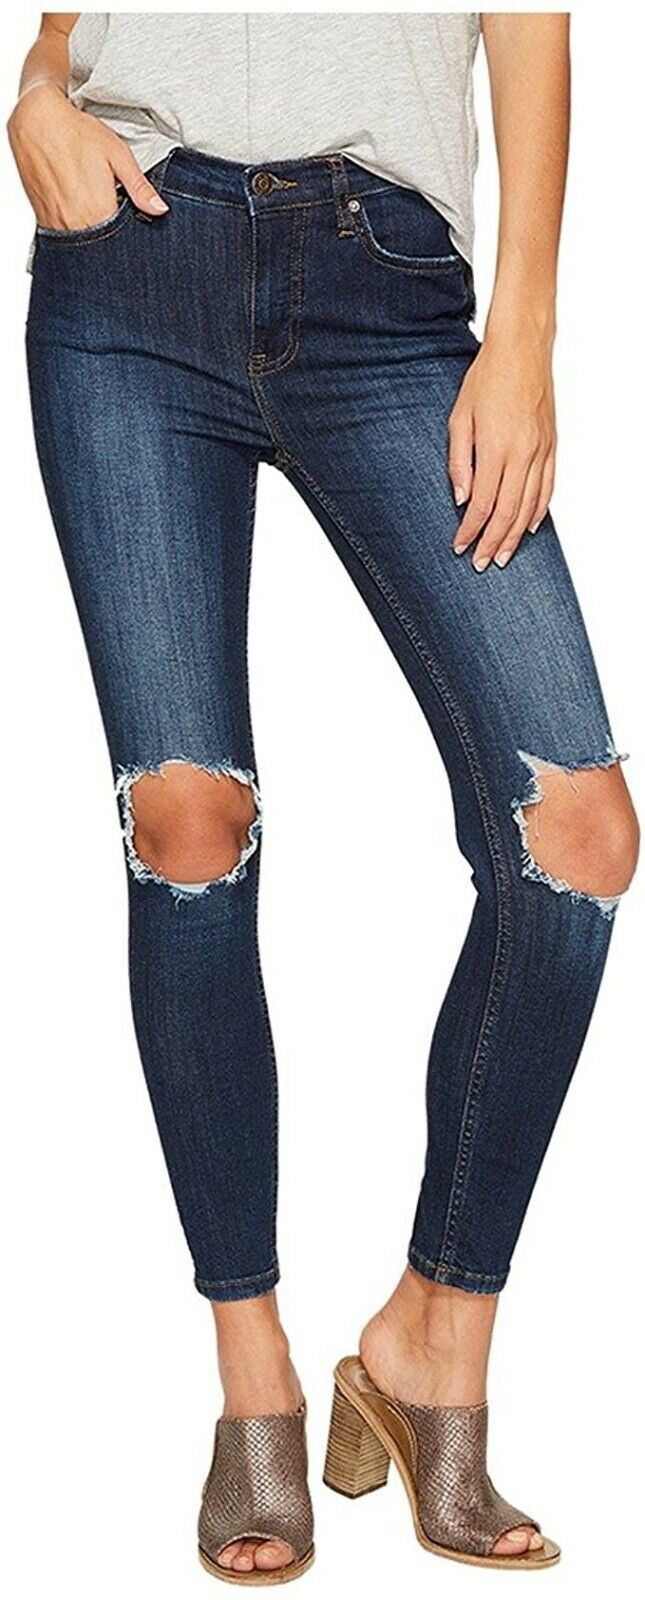 Free People Womens Busted Denim Destroyed Skinny Jeans Blue 28